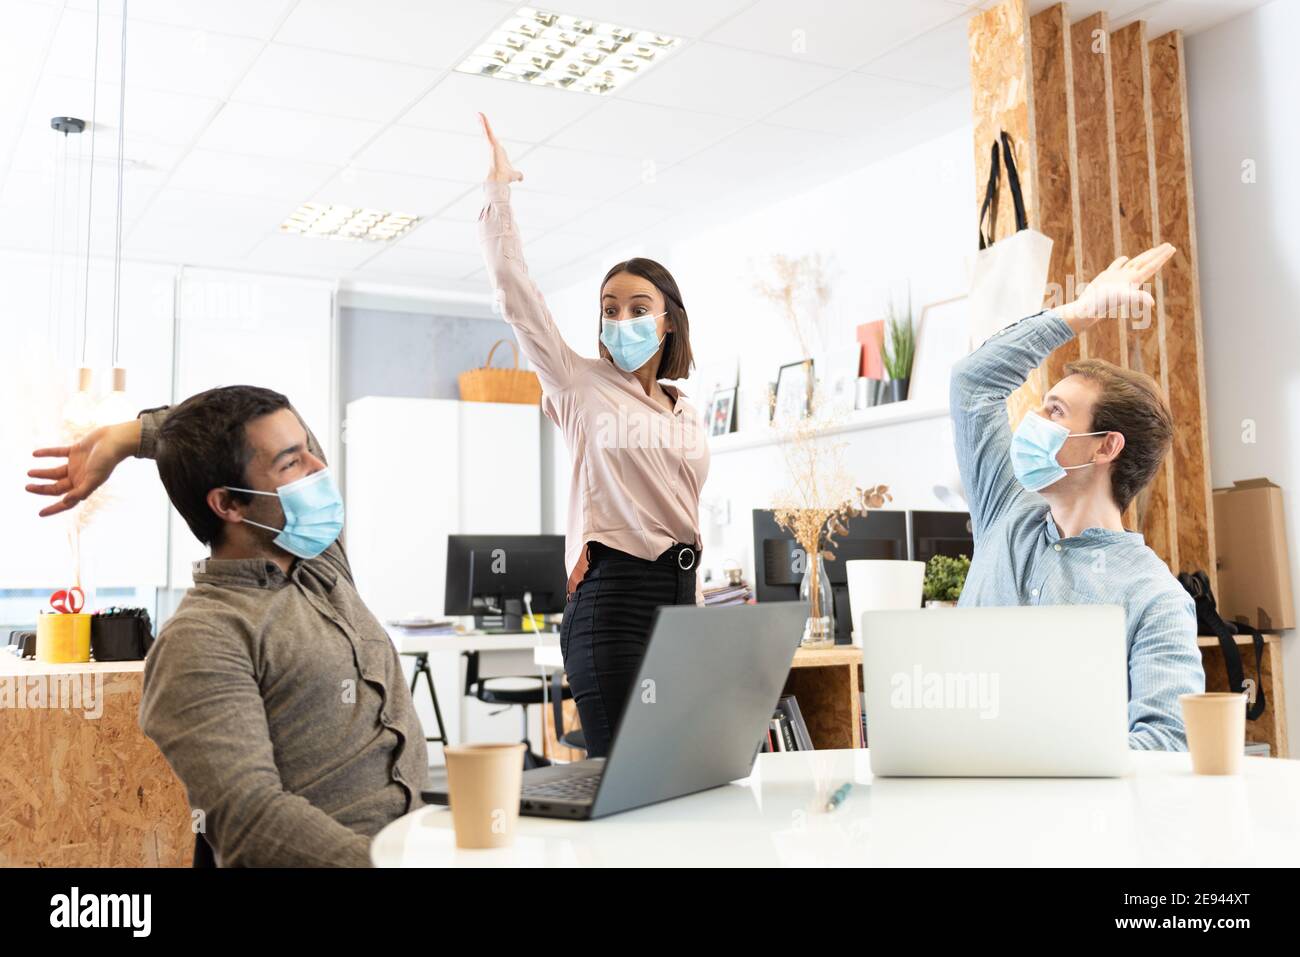 Happy coworkers celebrating with the hands up while wearing protective masks. Working in the office during Coronavirus pandemic concept. Stock Photo